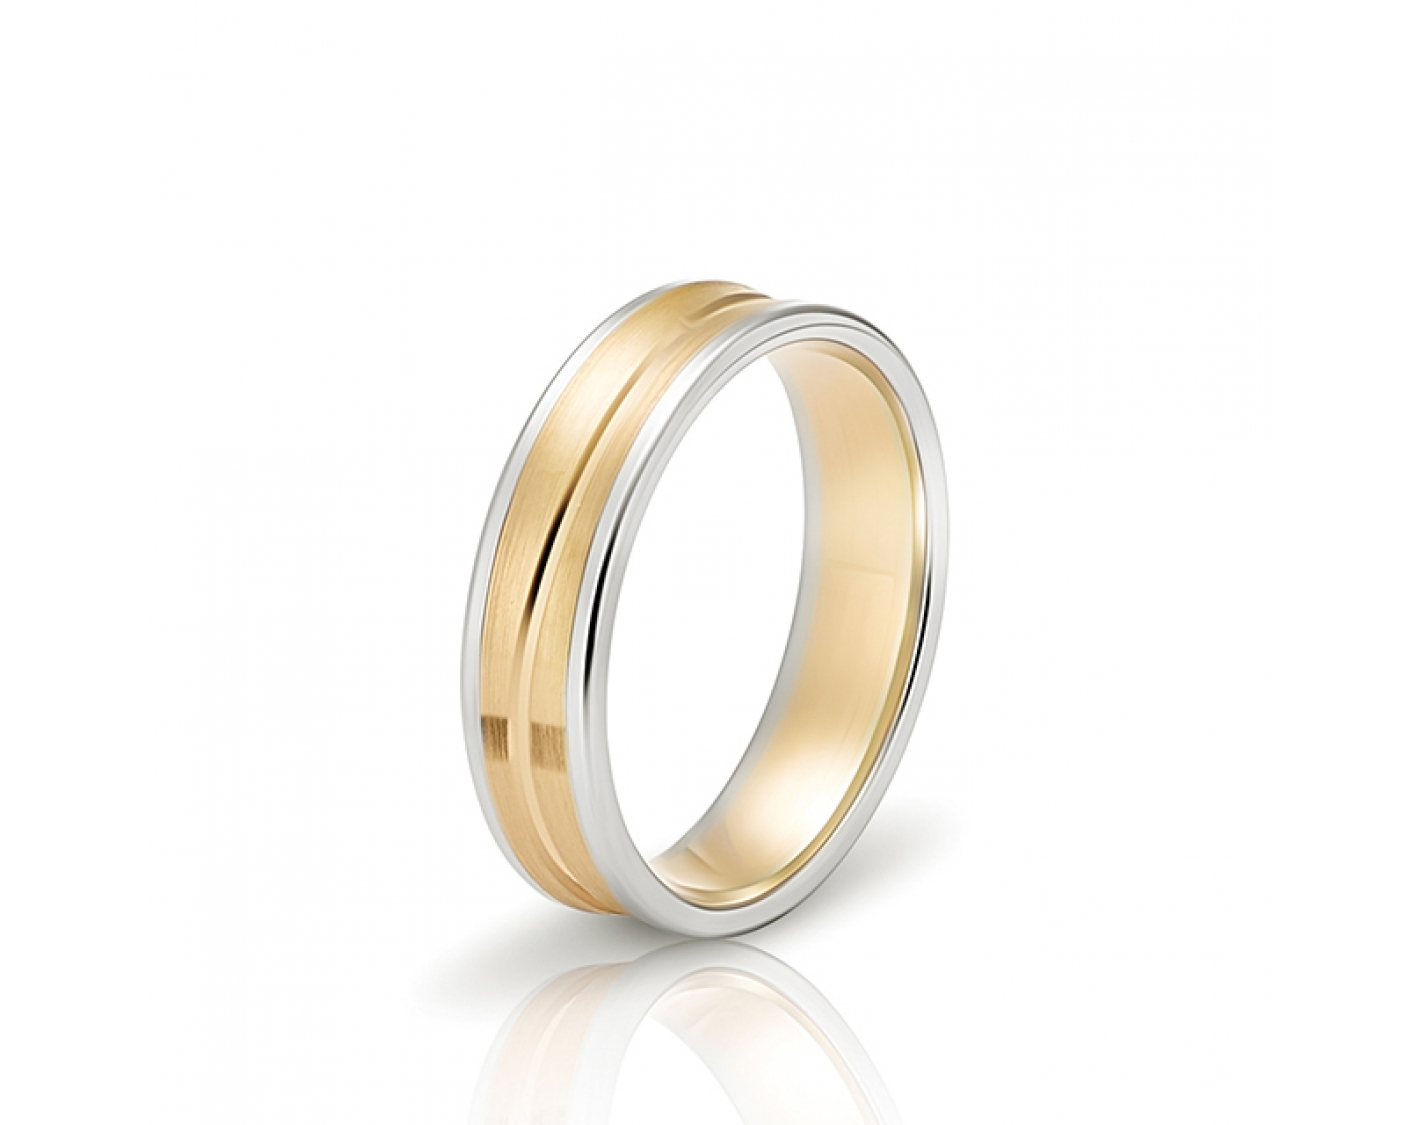 dual-tone 5,5mm two-toned* wedding band Photos & images